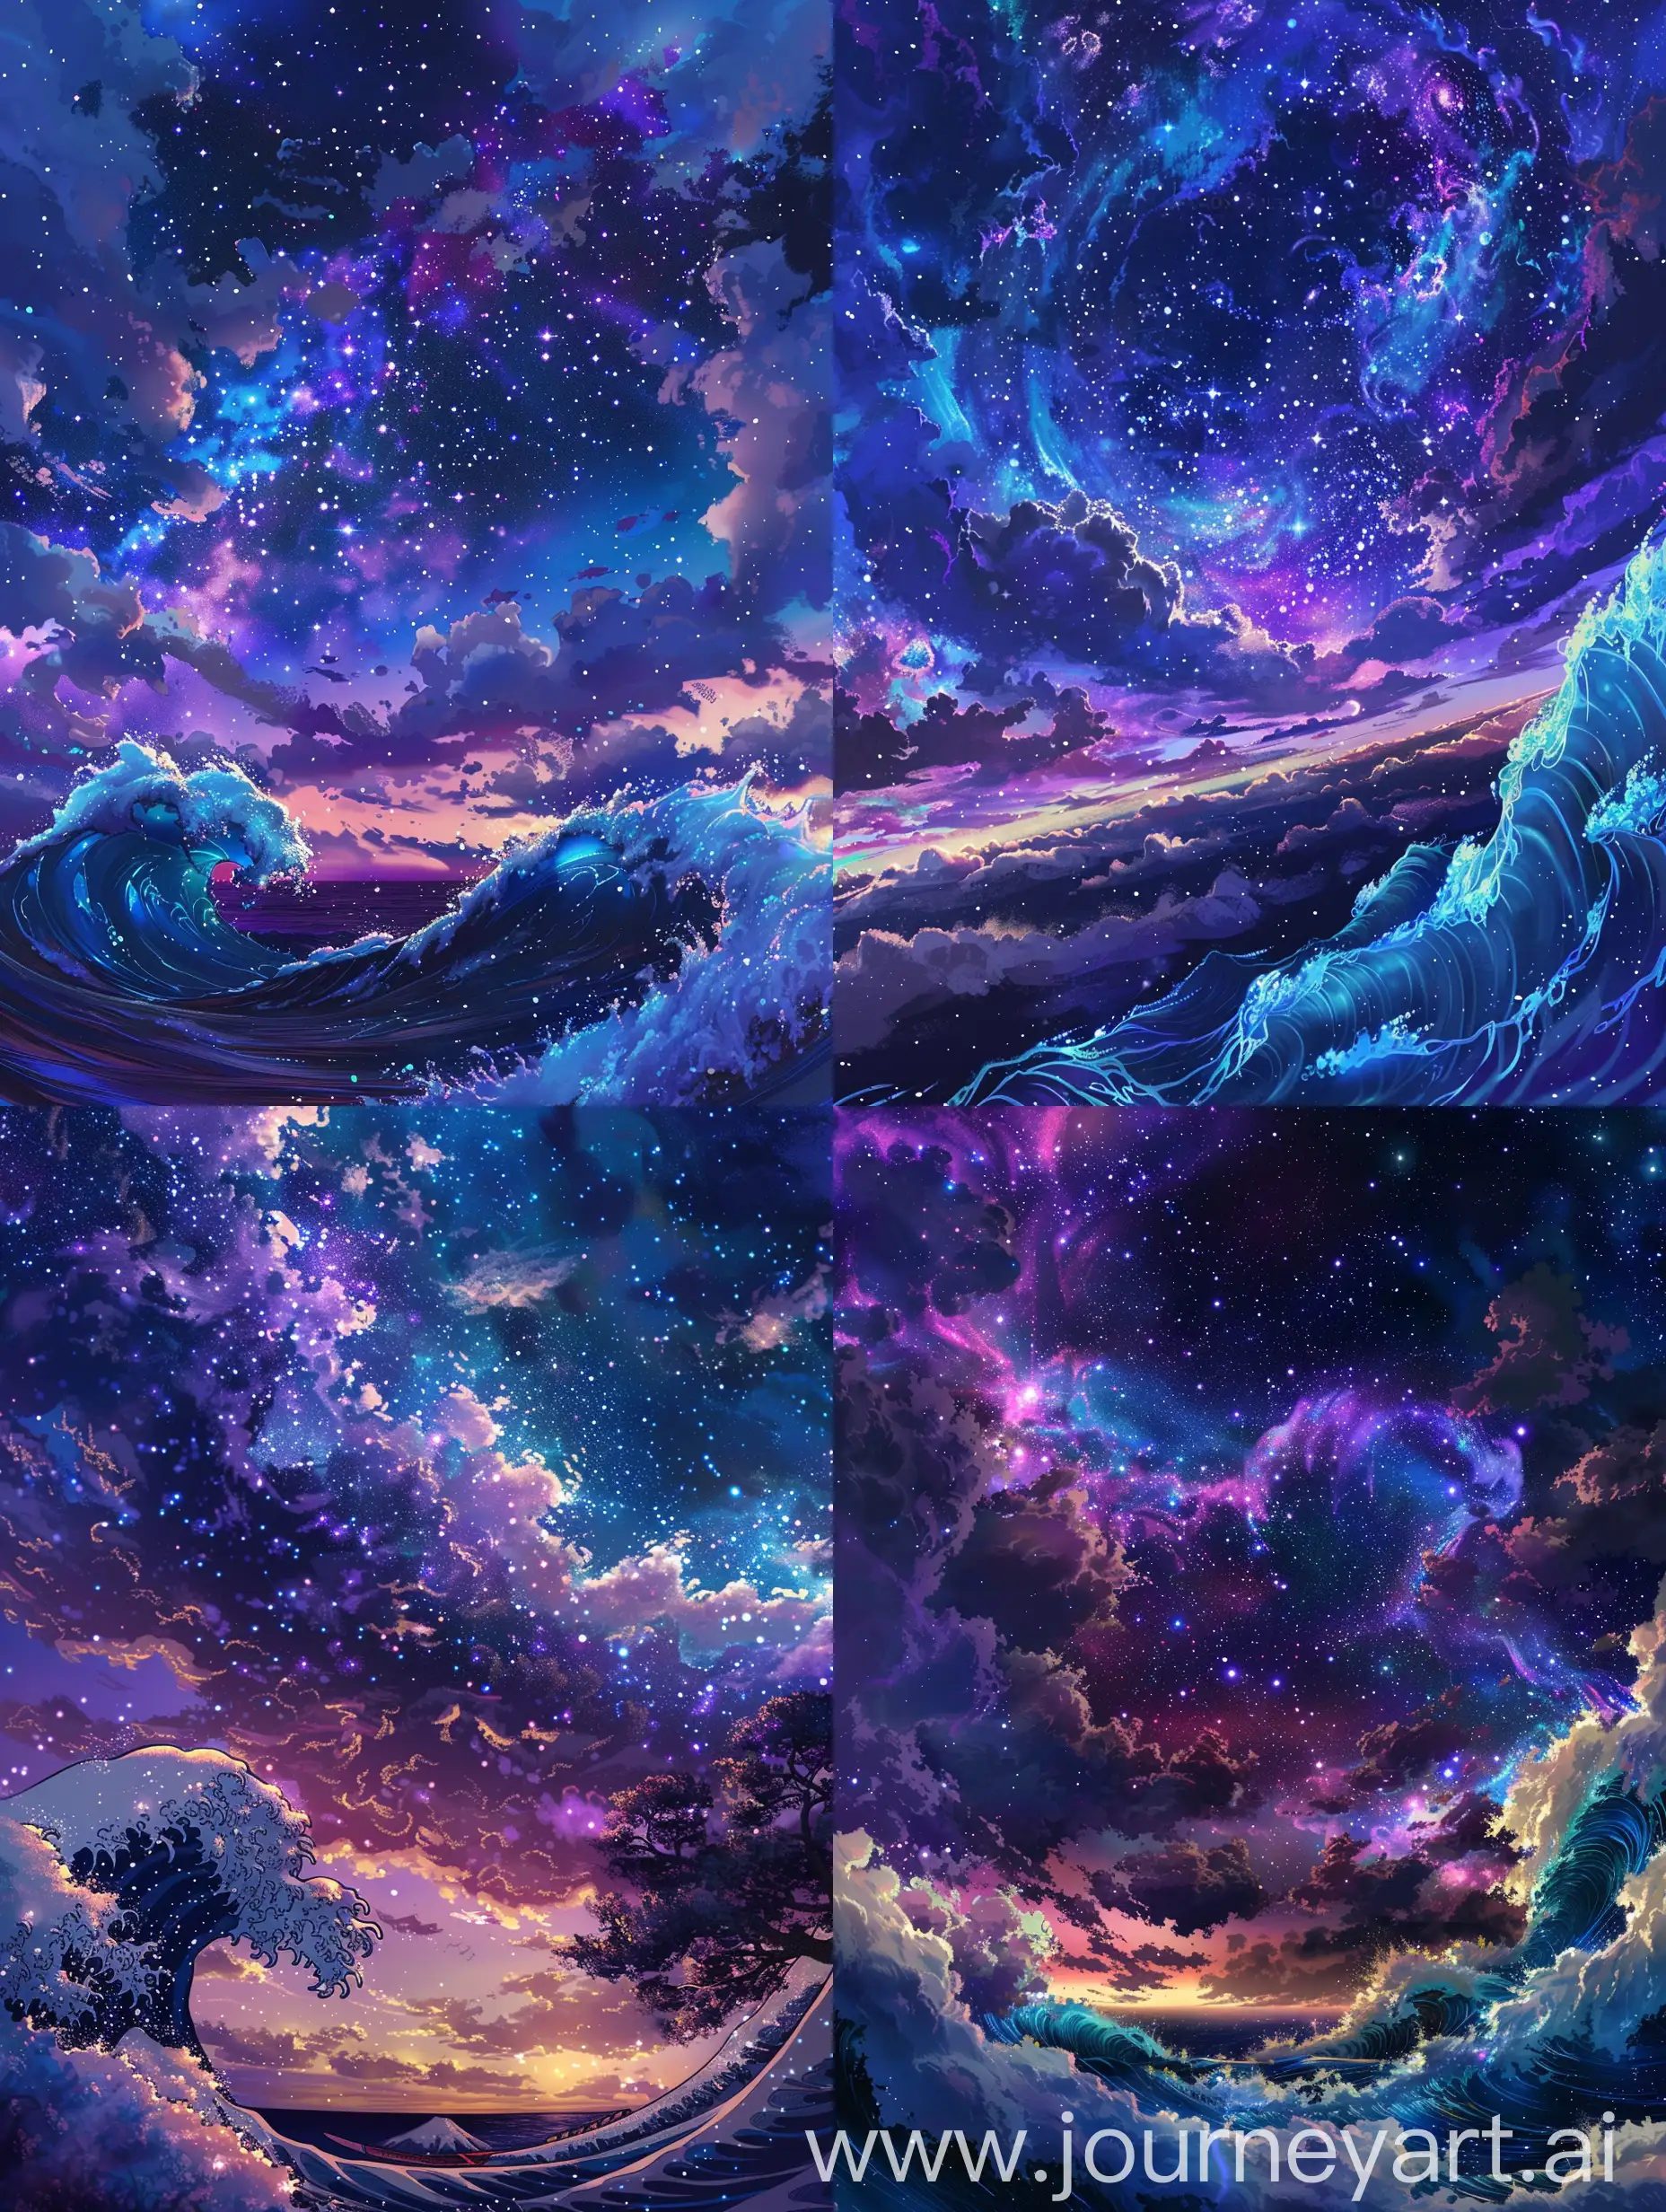 Stylized-Anime-Night-Sky-with-Vibrant-Nebulae-and-Swirling-Clouds